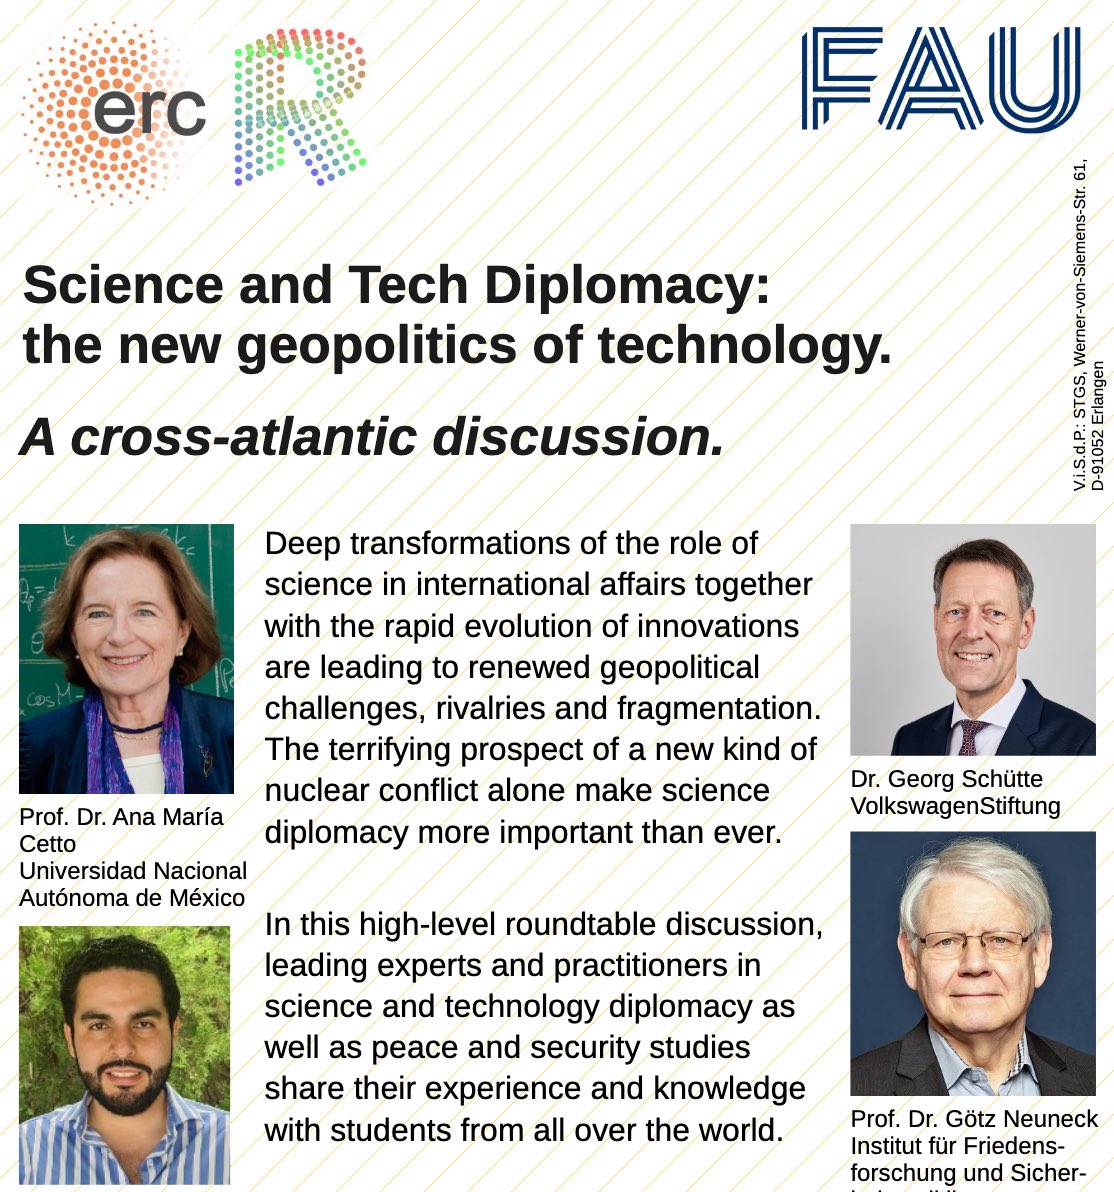 Science and Tech Diplomacy: the new geopolitics of technology